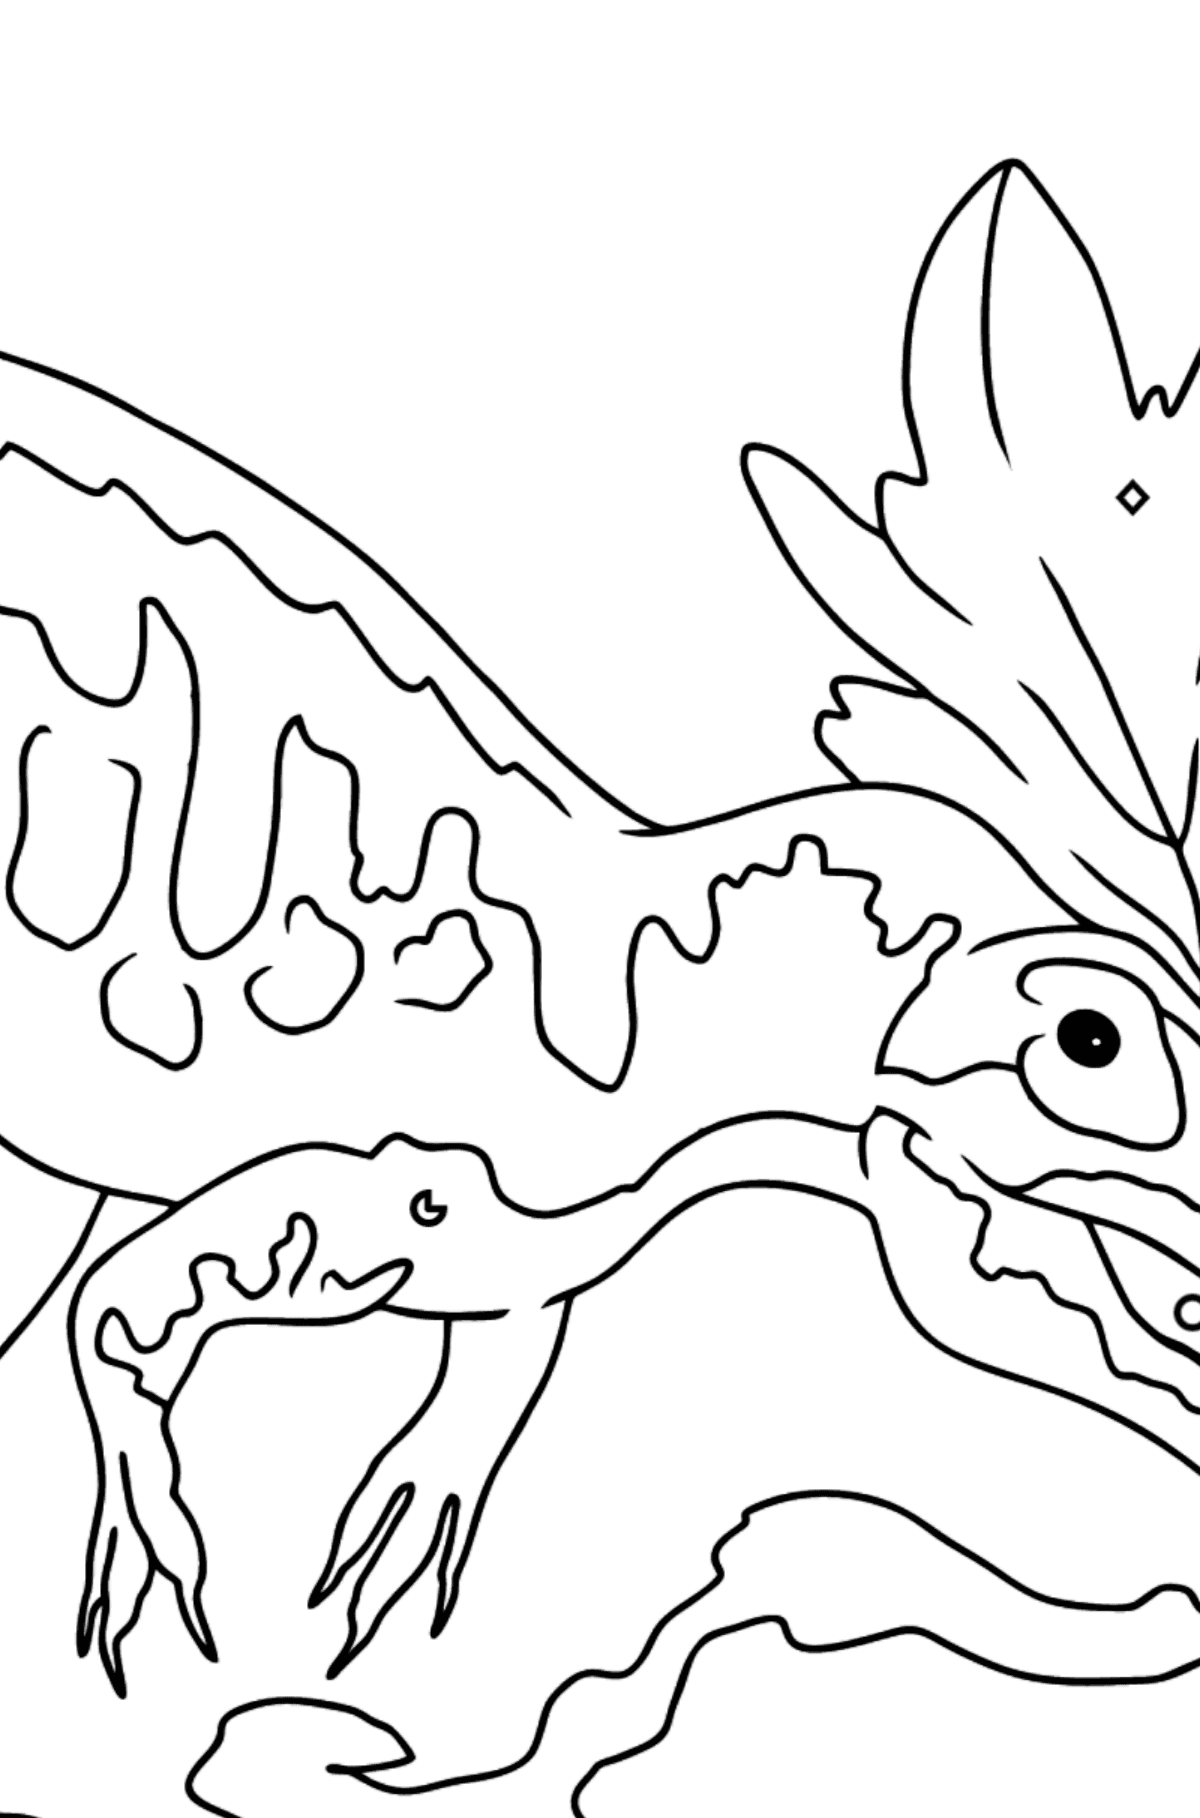 Allosaurus Coloring Page - Coloring by Geometric Shapes for Kids